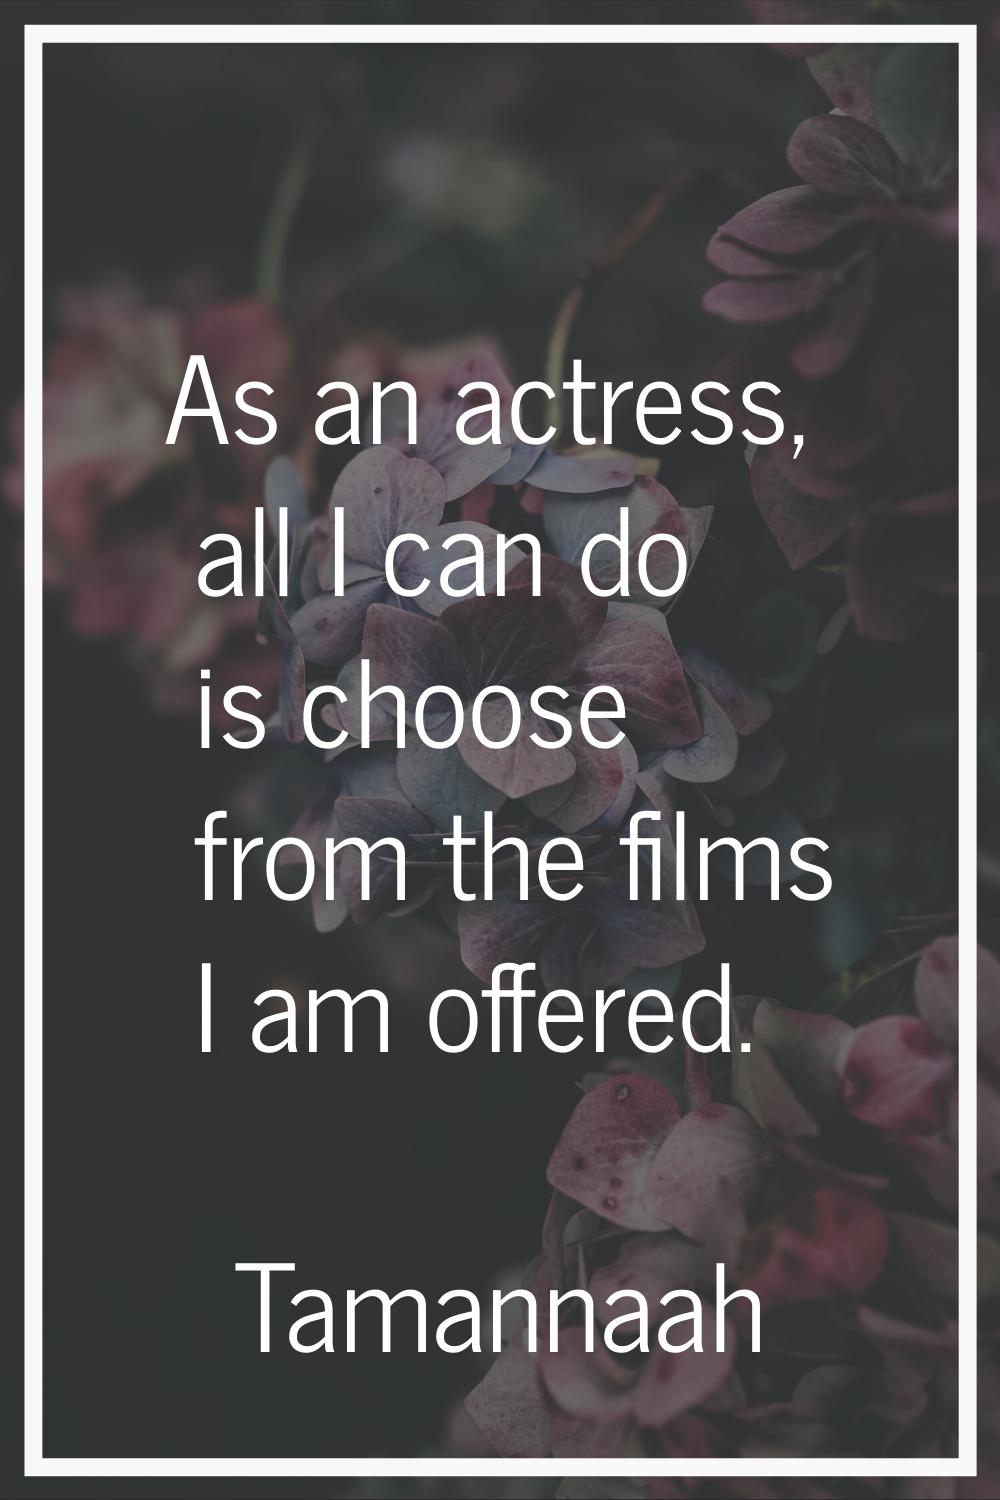 As an actress, all I can do is choose from the films I am offered.